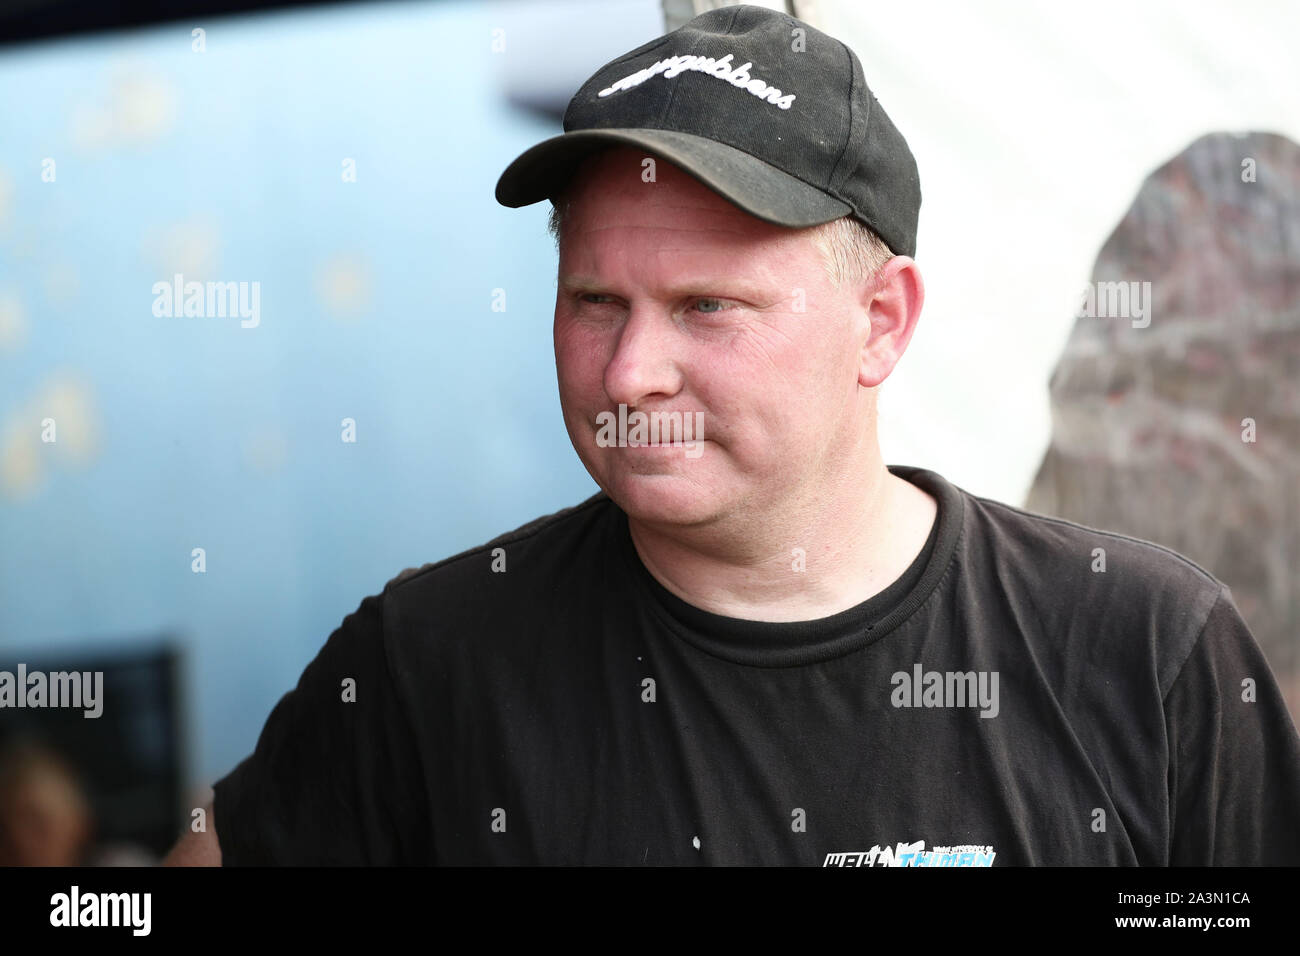 Folkrace High Resolution Stock Photography and Images - Alamy